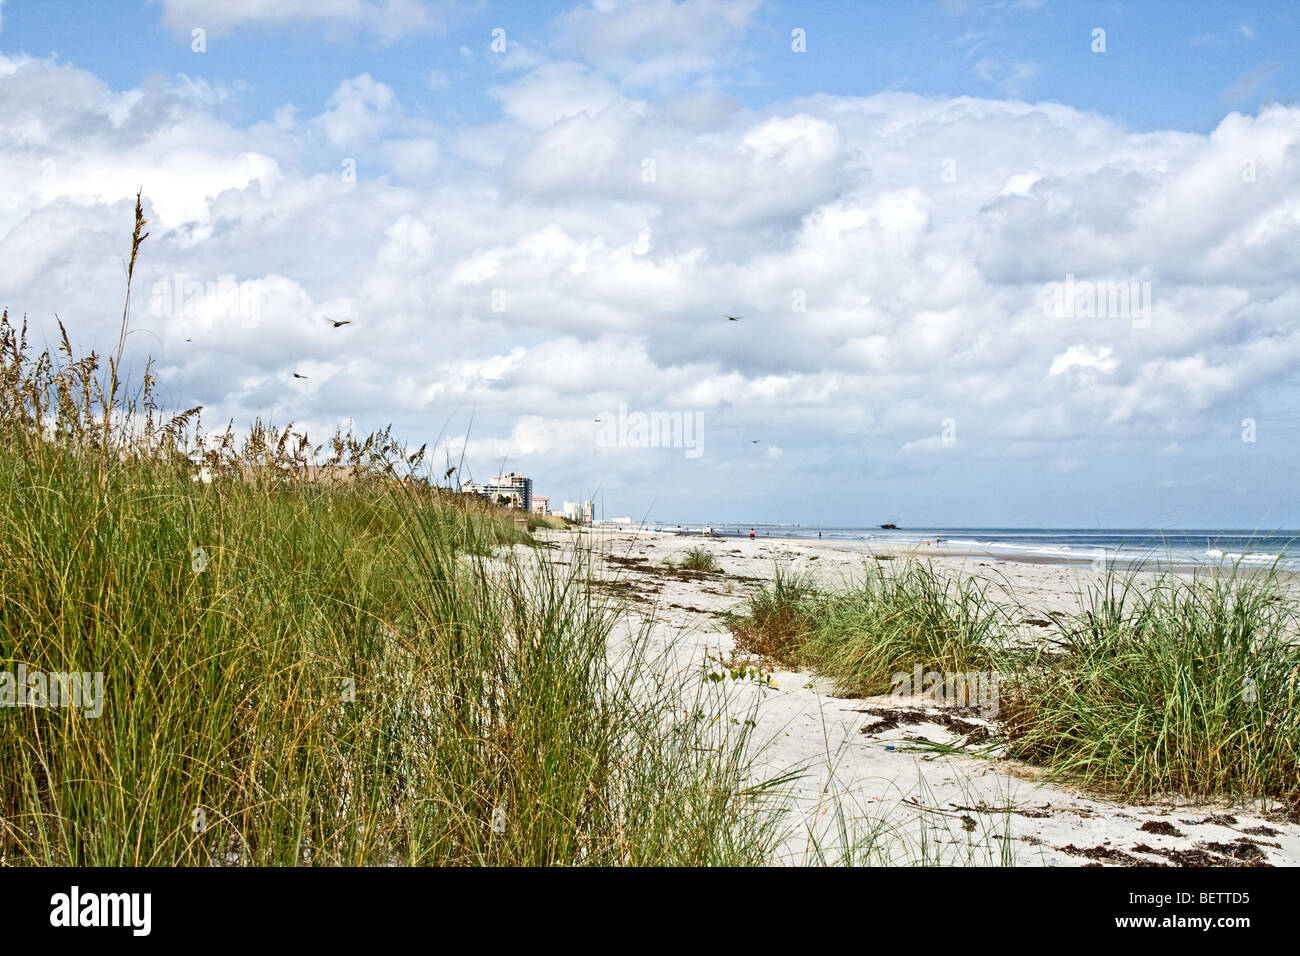 Sea oats by the beach on a beach in Florida Stock Photo